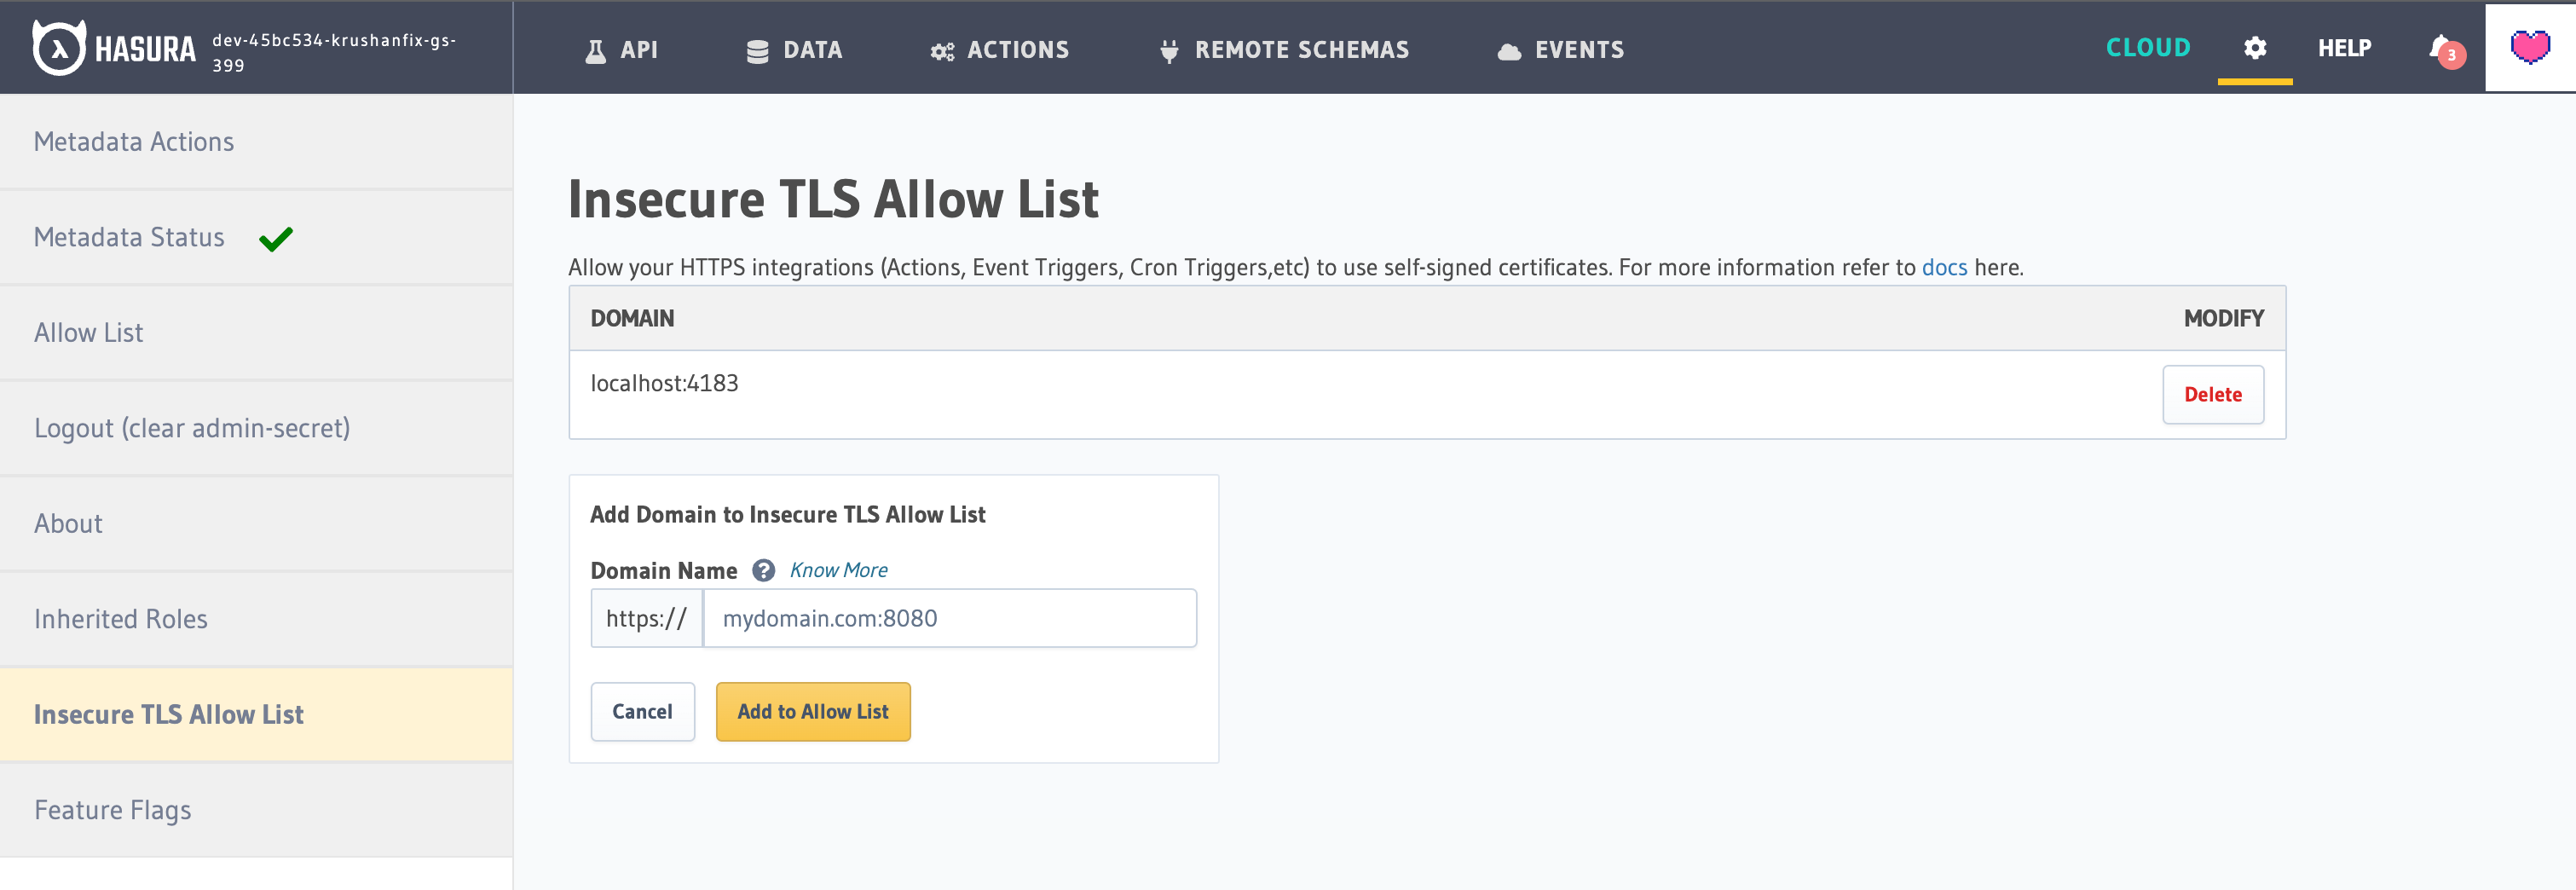 Add a host to the TLS allow list